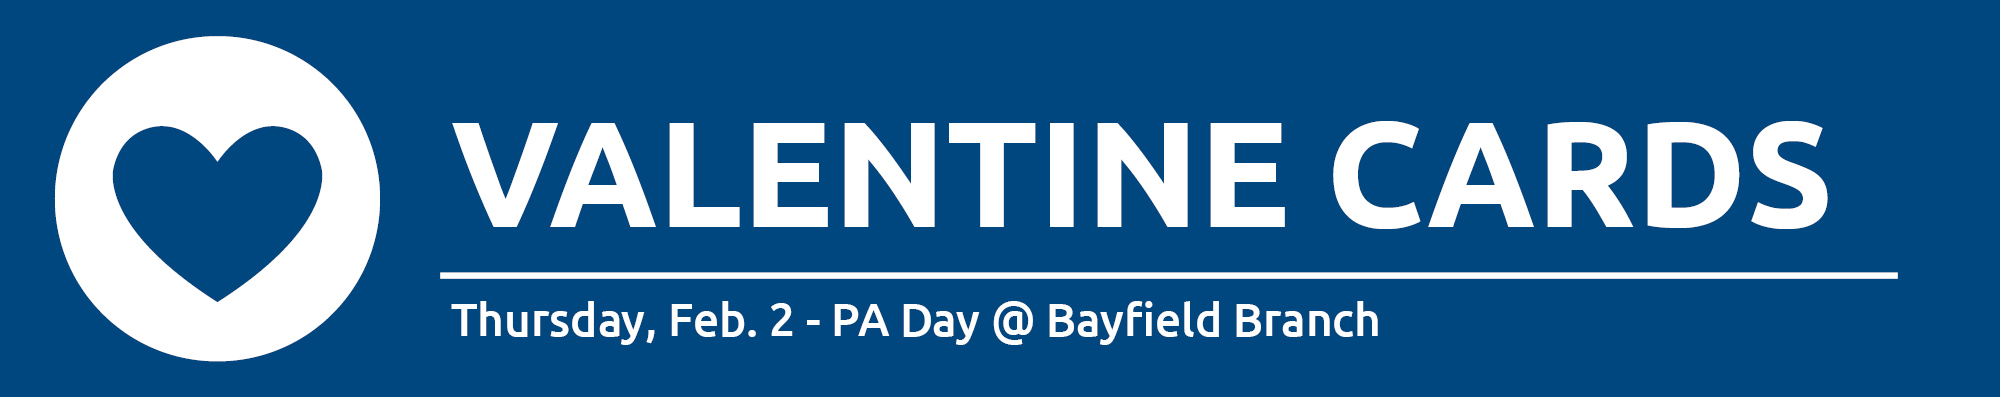 Illustration of a heart with text promoting PA Day Valentine Card making at Bayfield Branch